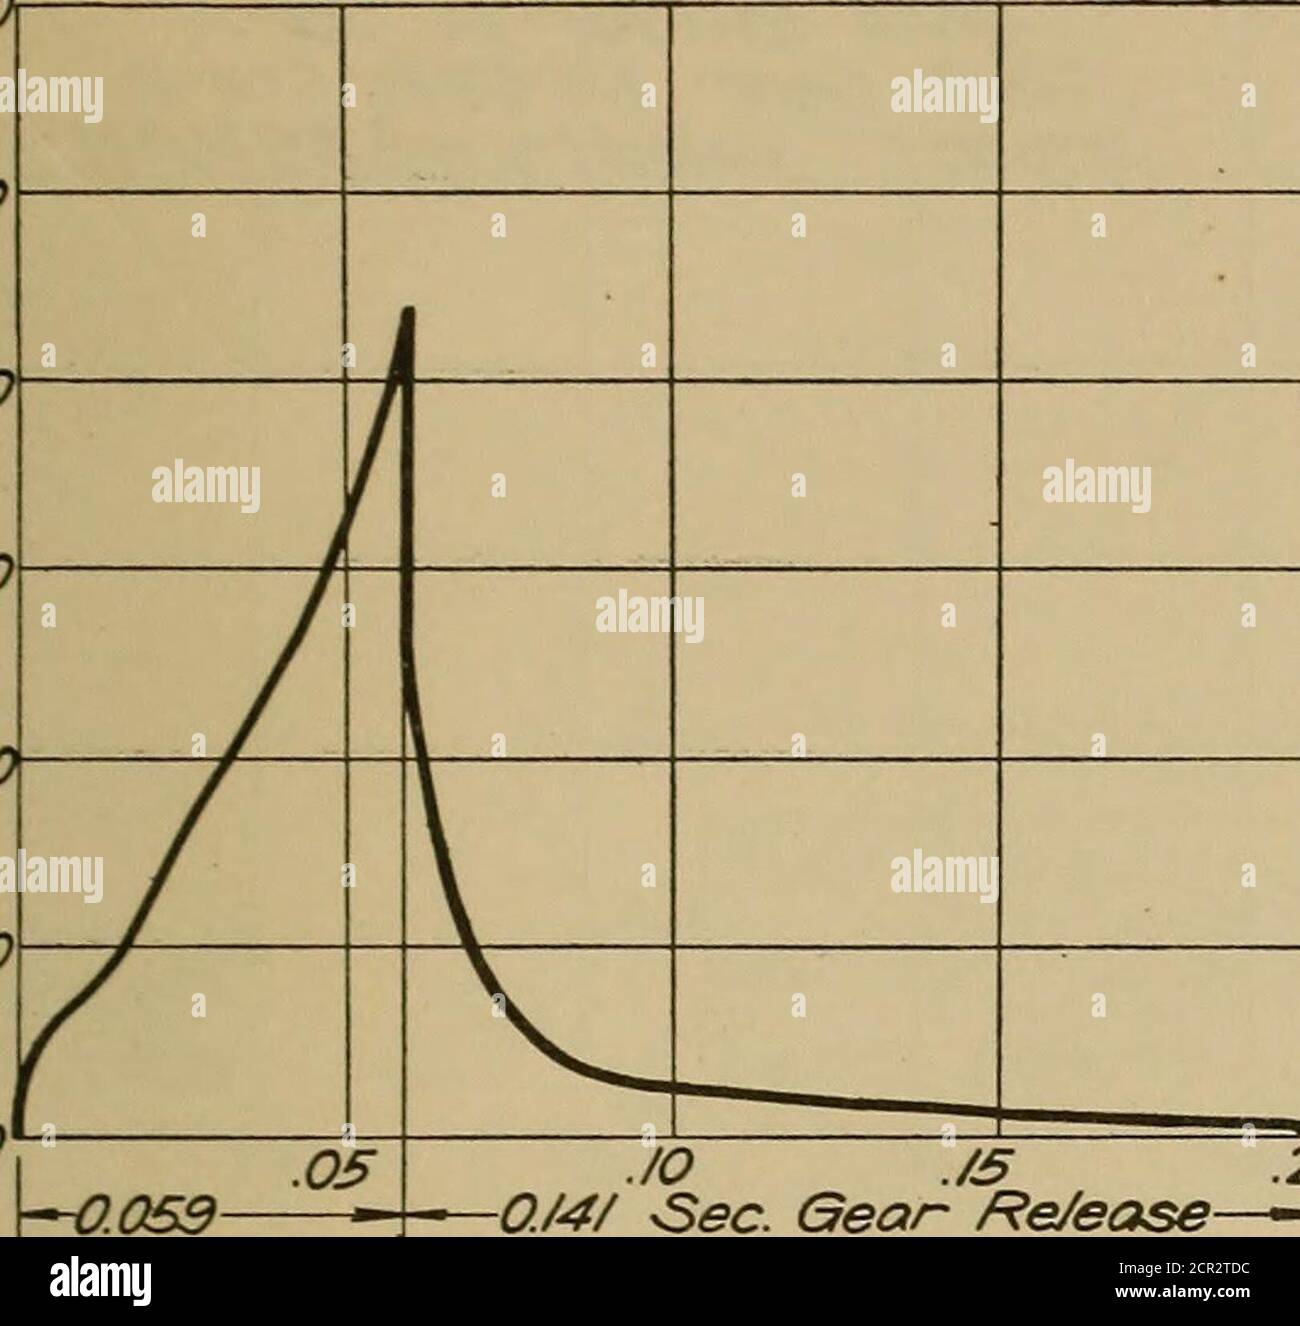 . Report of draft gear tests, United State Railroad administration, Inspection and test section; . Time—Seconds Full lines represent the instantaneous kinetic energy ofthe moving cars. Dotted lines represent the energy stored and absorbedduring the draft gear cycle. Figs. 83c and 83j—Energy Curves, Christy Gears Draft Gear Tests of the U. S. Railroad Administration 233 600] soo. &lt;So//d Buffer /n Cor A. nTest Gear No. 52 in Cor B.frnpact Ve/oc/tV=3.56 M.PH 400 300 200 100 figure63k I —0.059 JO ./5 .2Q -0./4/ Sec. Gear Re/ease— Sec. Gear Compress. 0200 Sec. Draff Gear Cyc/e- .25 30 35 40 ^300 Stock Photo